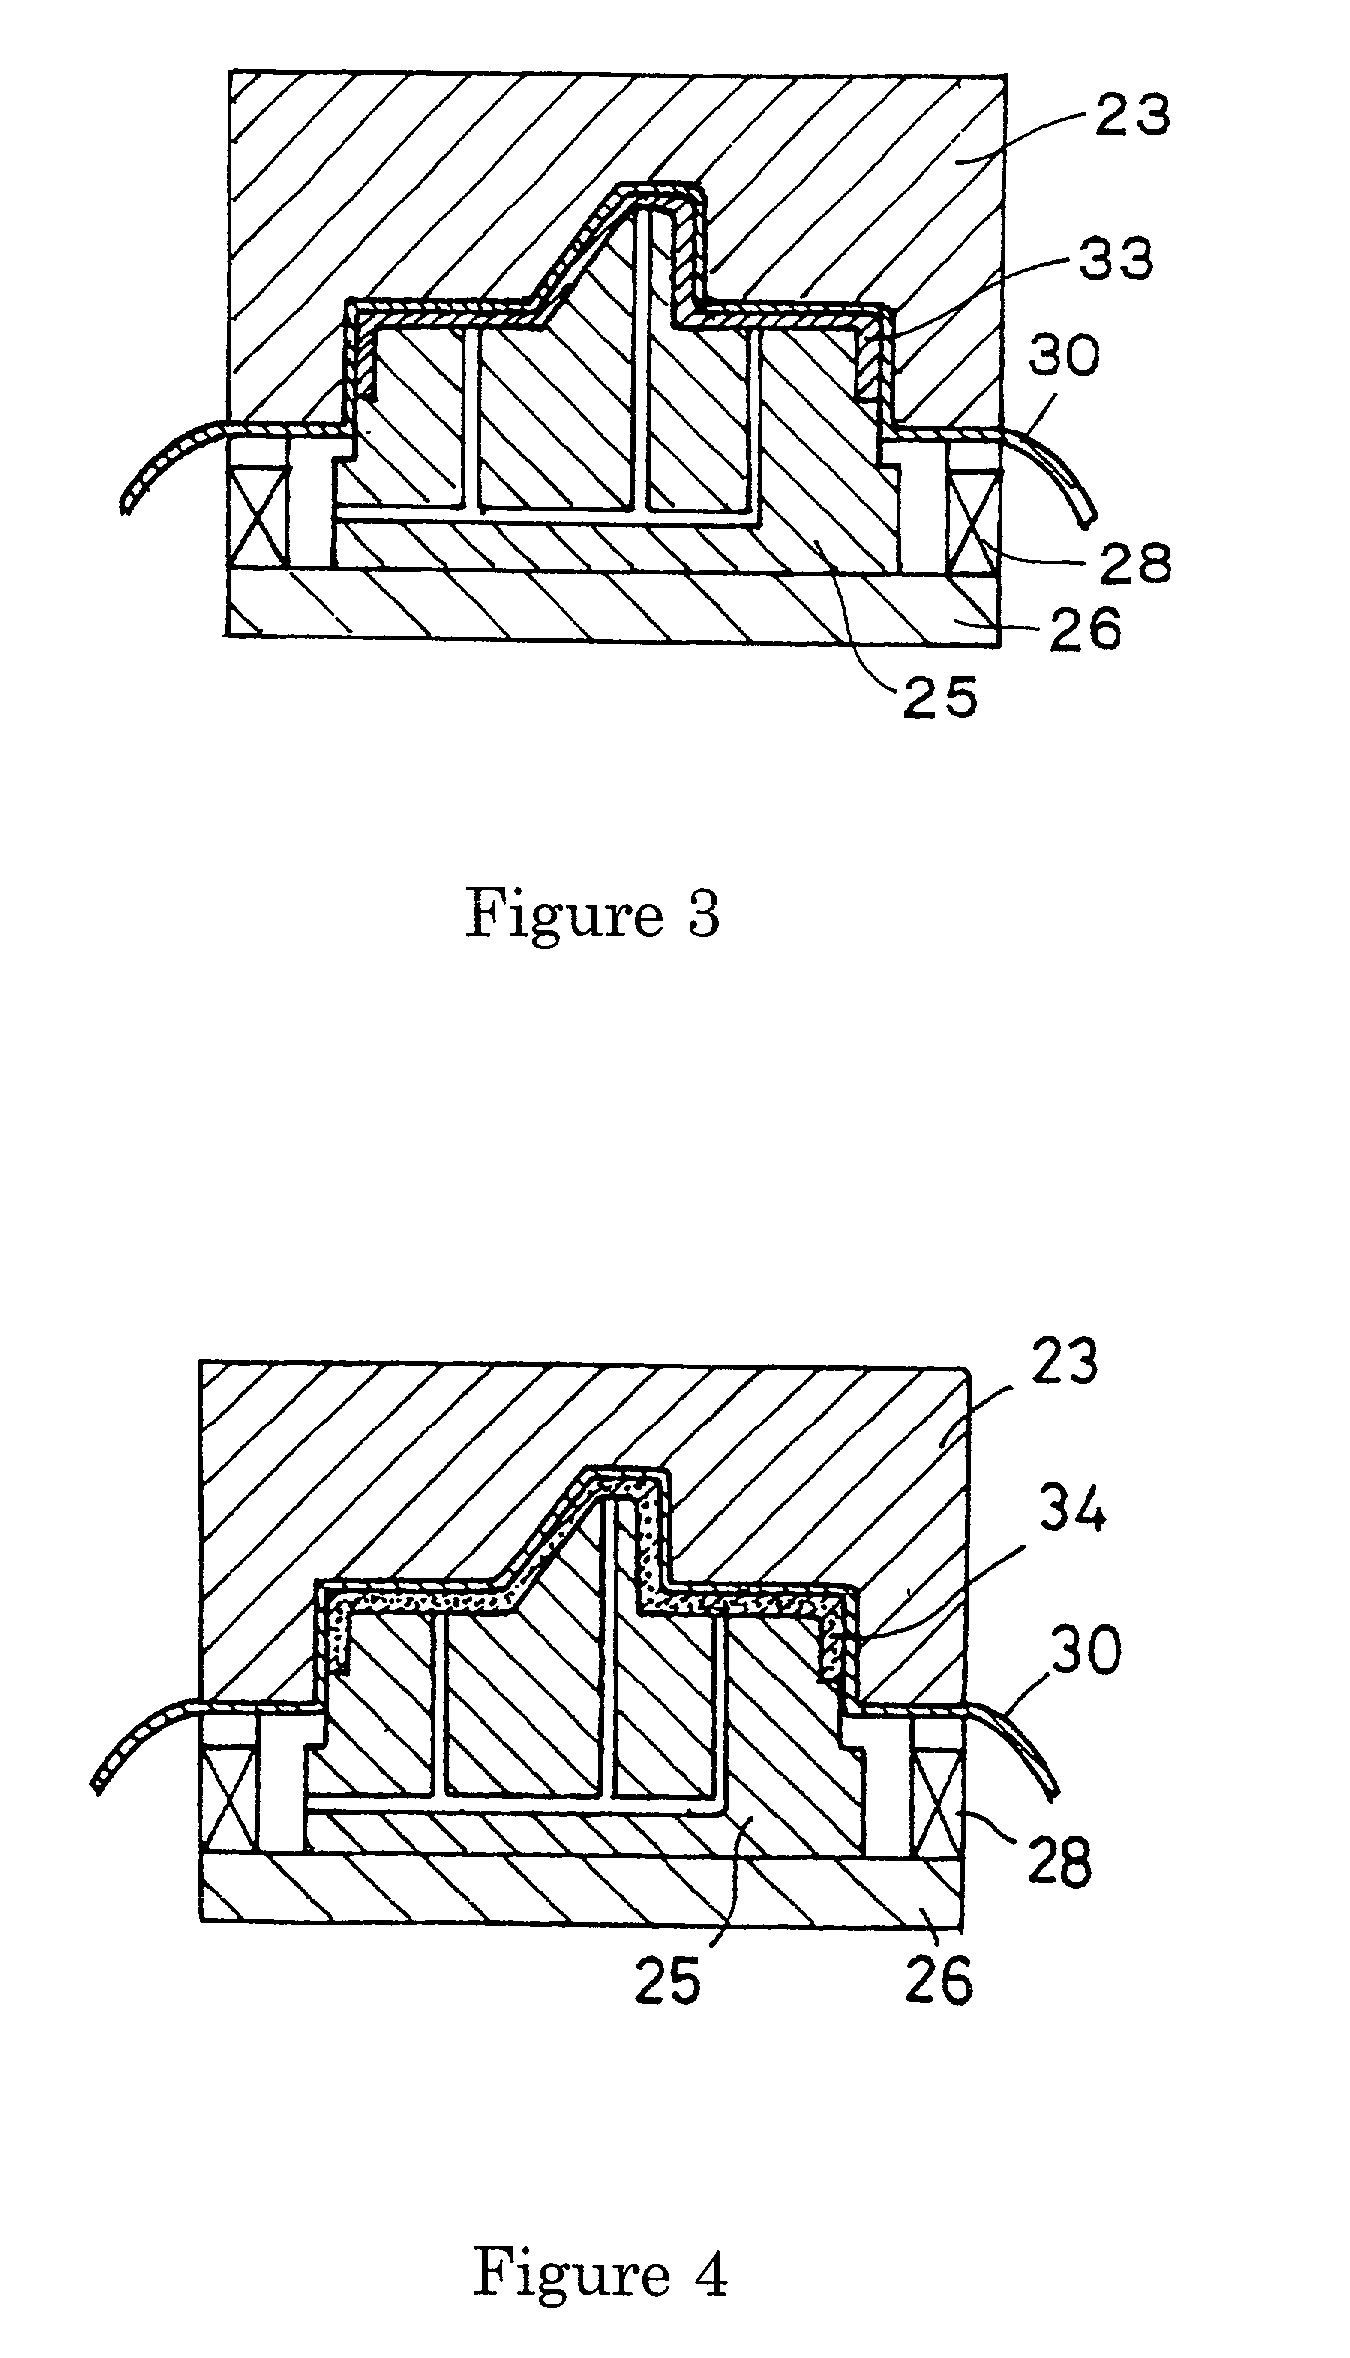 Process for producing a skin material-laminated foamed thermoplastic resin molding and foamed thermoplastic resin moldings